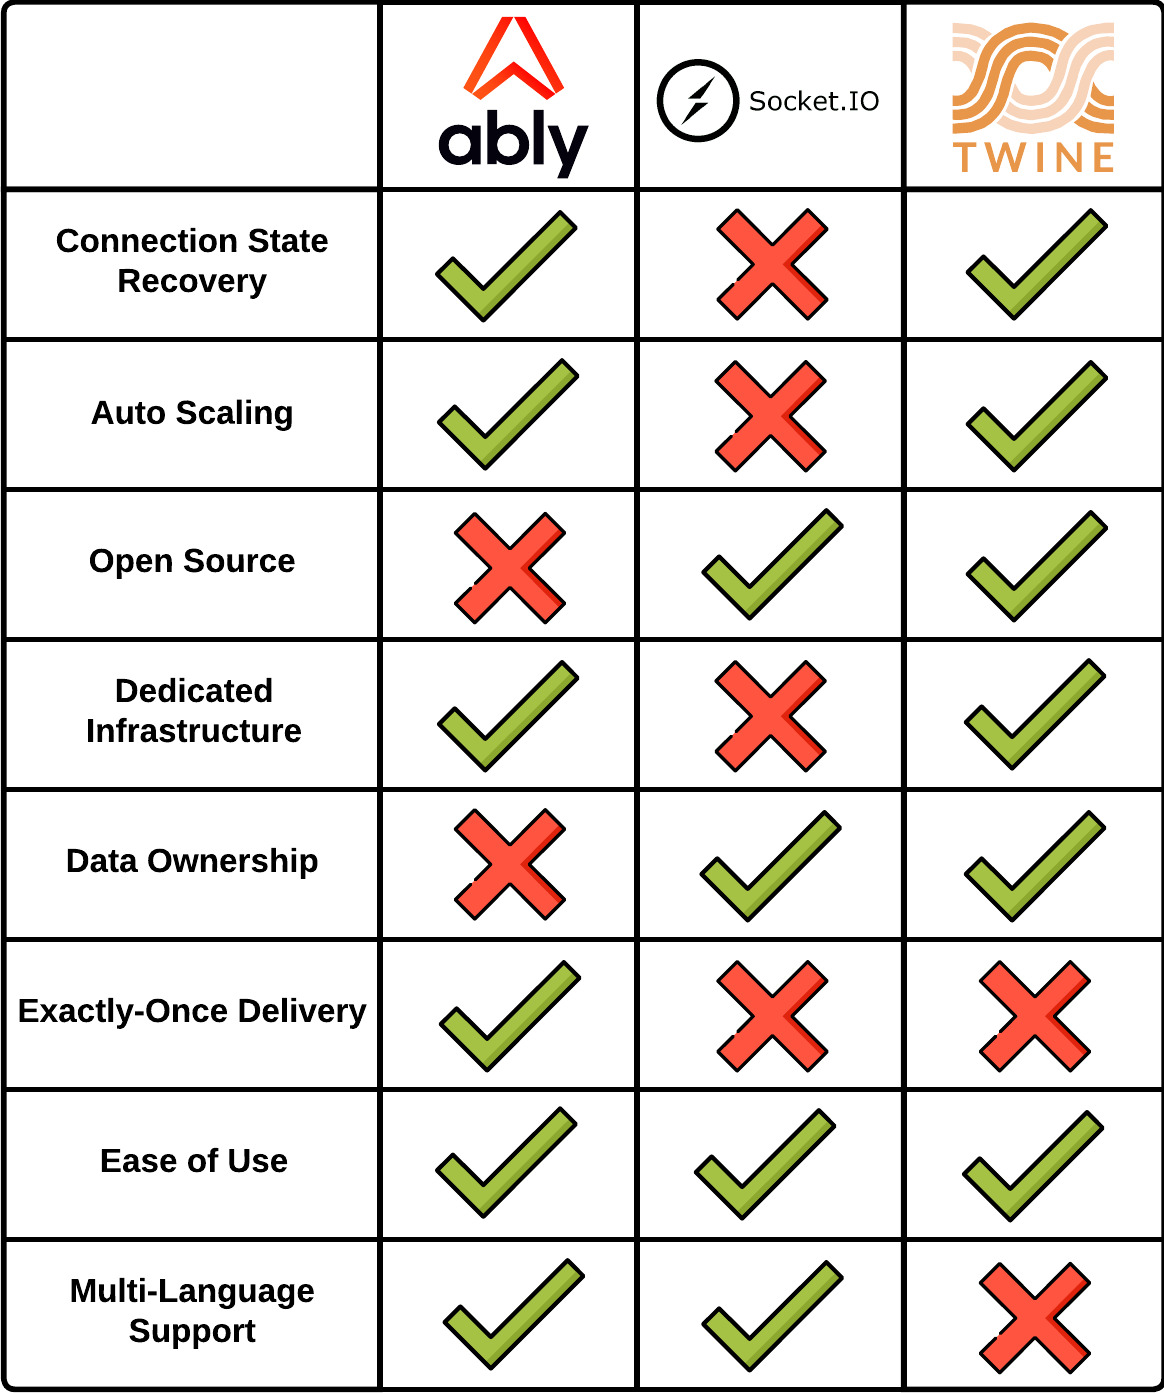 Comparison of Ably, Socket.IO, and Twine